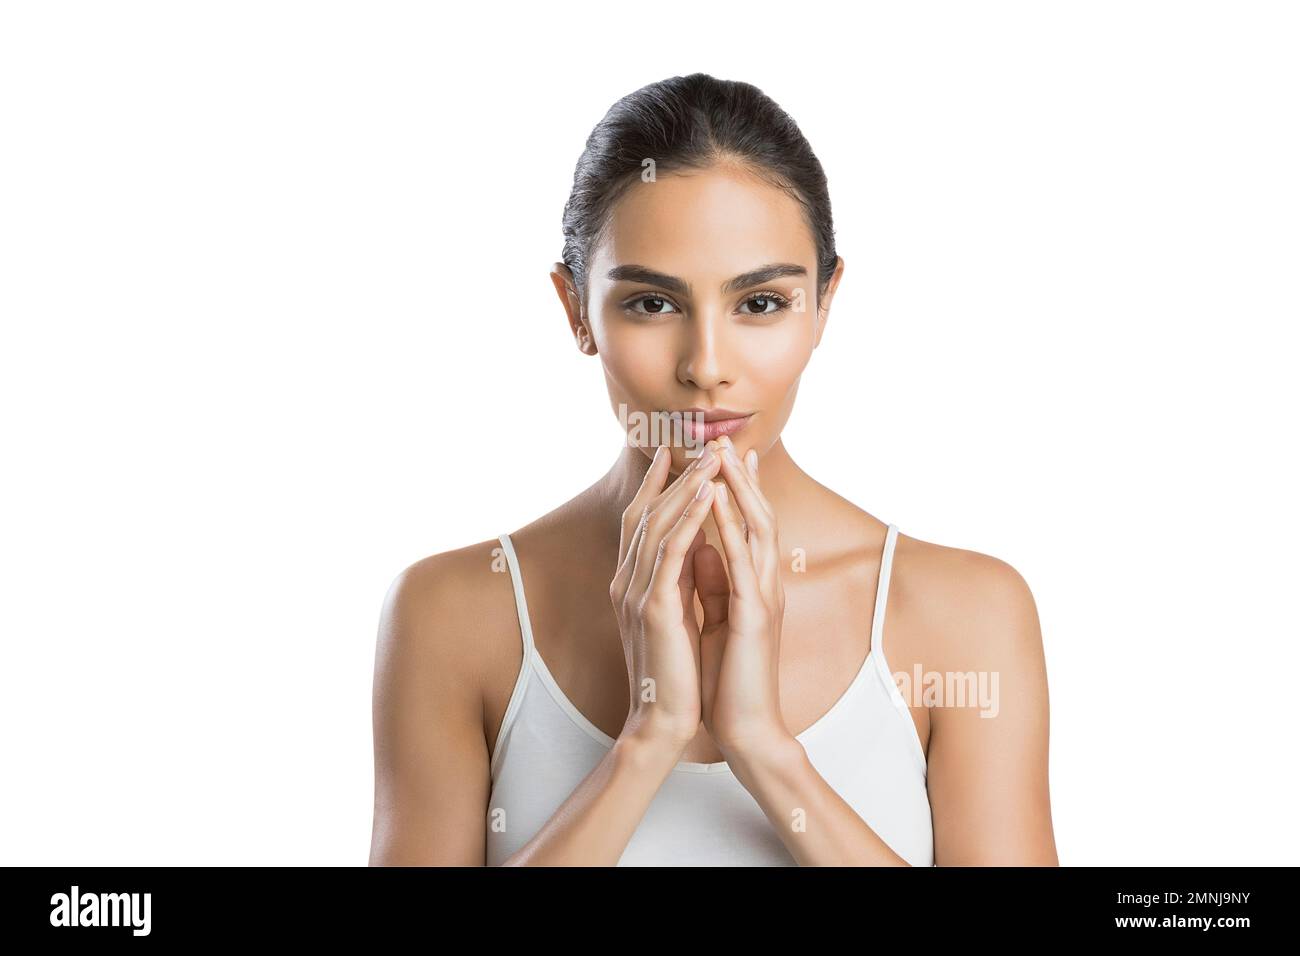 Portrait of serious young woman with hands clasped Stock Photo